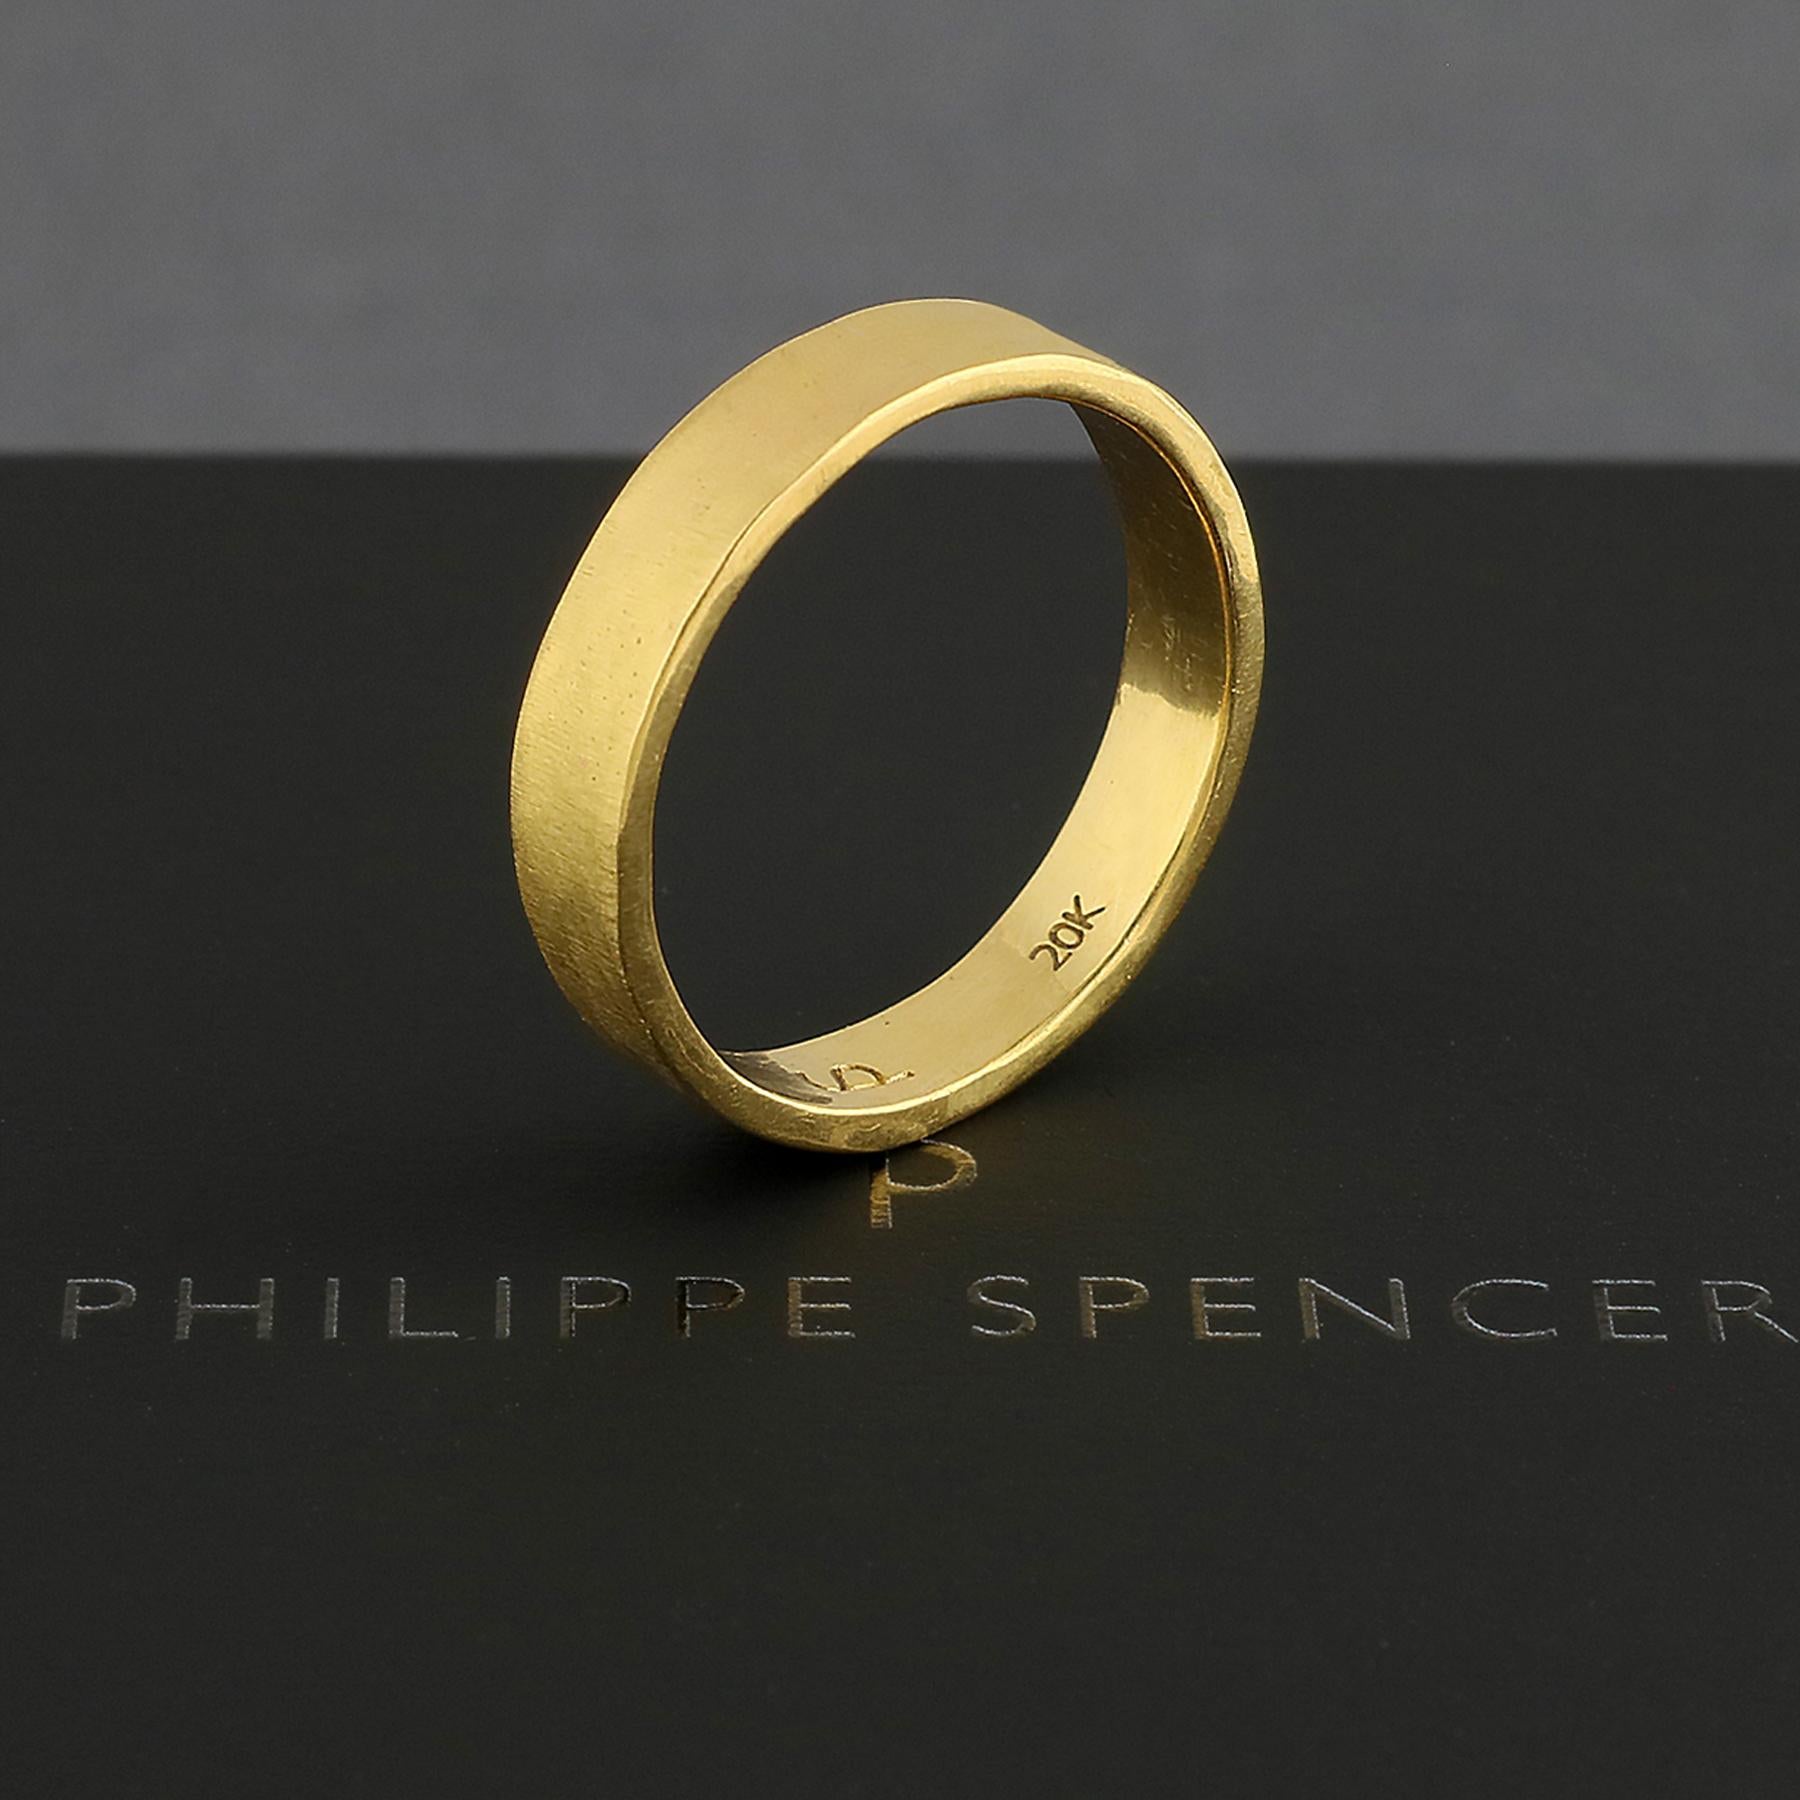 PHILIPPE-SPENCER - 4 X 1.25mm Solid 20K Gold Hand-Forged Statement Band. Heavy Matte Exterior, Mirror Polished Interior.  Each is a unique one-of-a-kind work of art. This PHILIPPE SPENCER solid 20K Gold Hand Made band is extremely popular with both